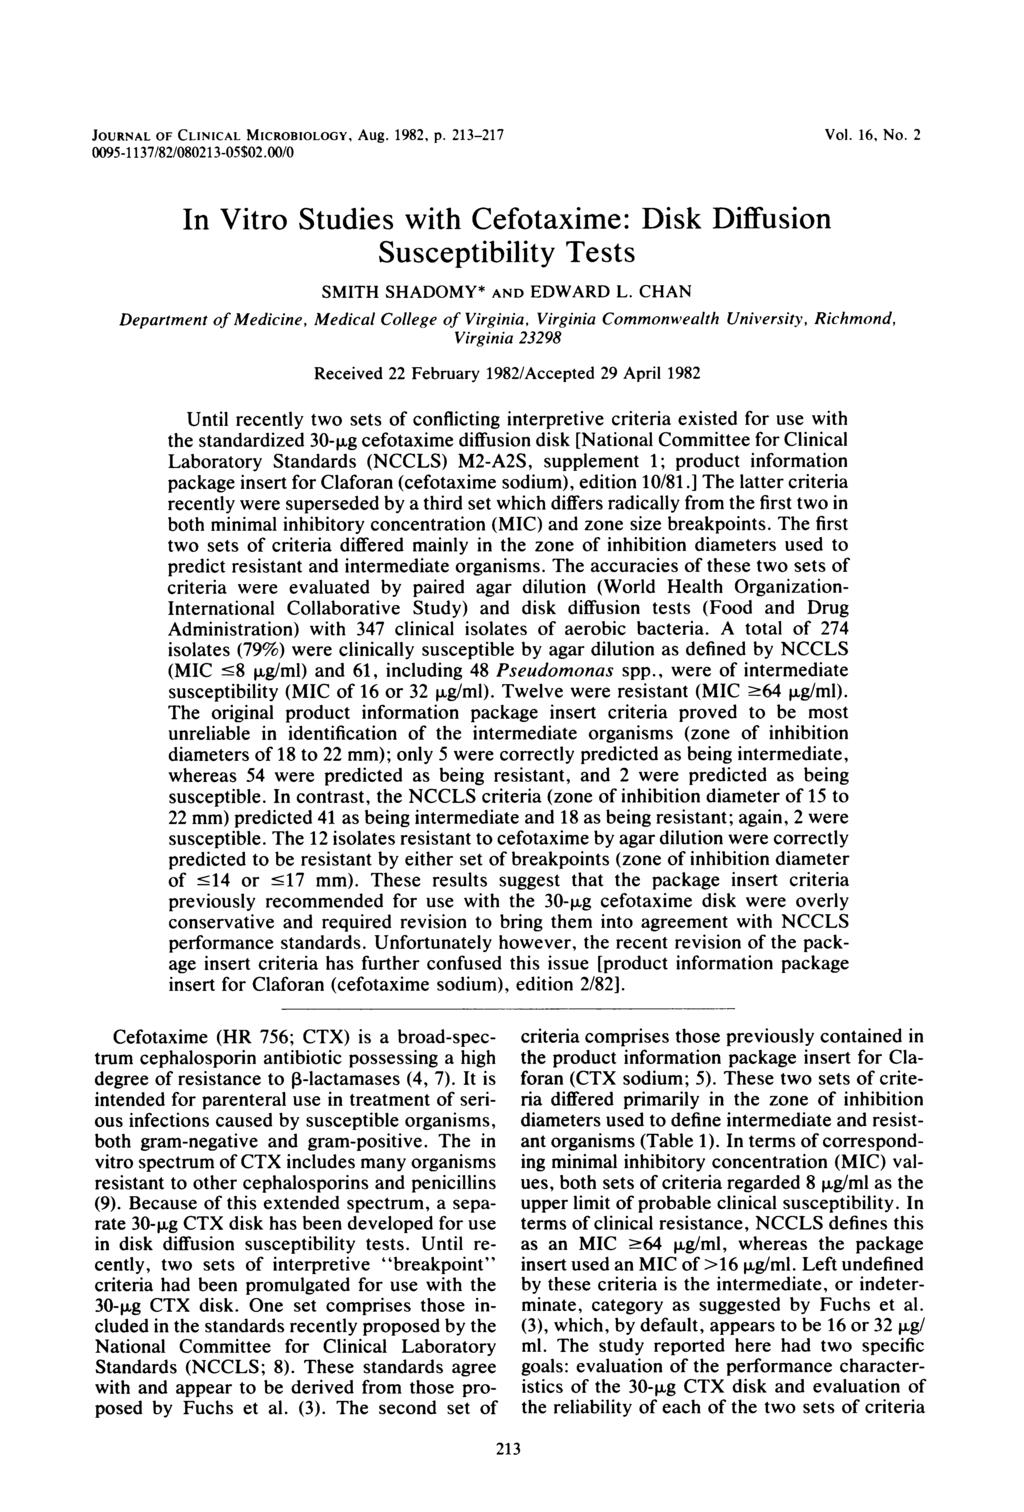 JOURNAL OF CLINICAL MICROBIOLOGY, Aug. 1982, p. 213-217 Vol. 16, No. 2 0095-1137/82/080213-05$02.00/0 In Vitro Studies with Cefotaxime: Disk Diffusion Susceptibility Tests SMITH SHADOMY* AND EDWARD L.